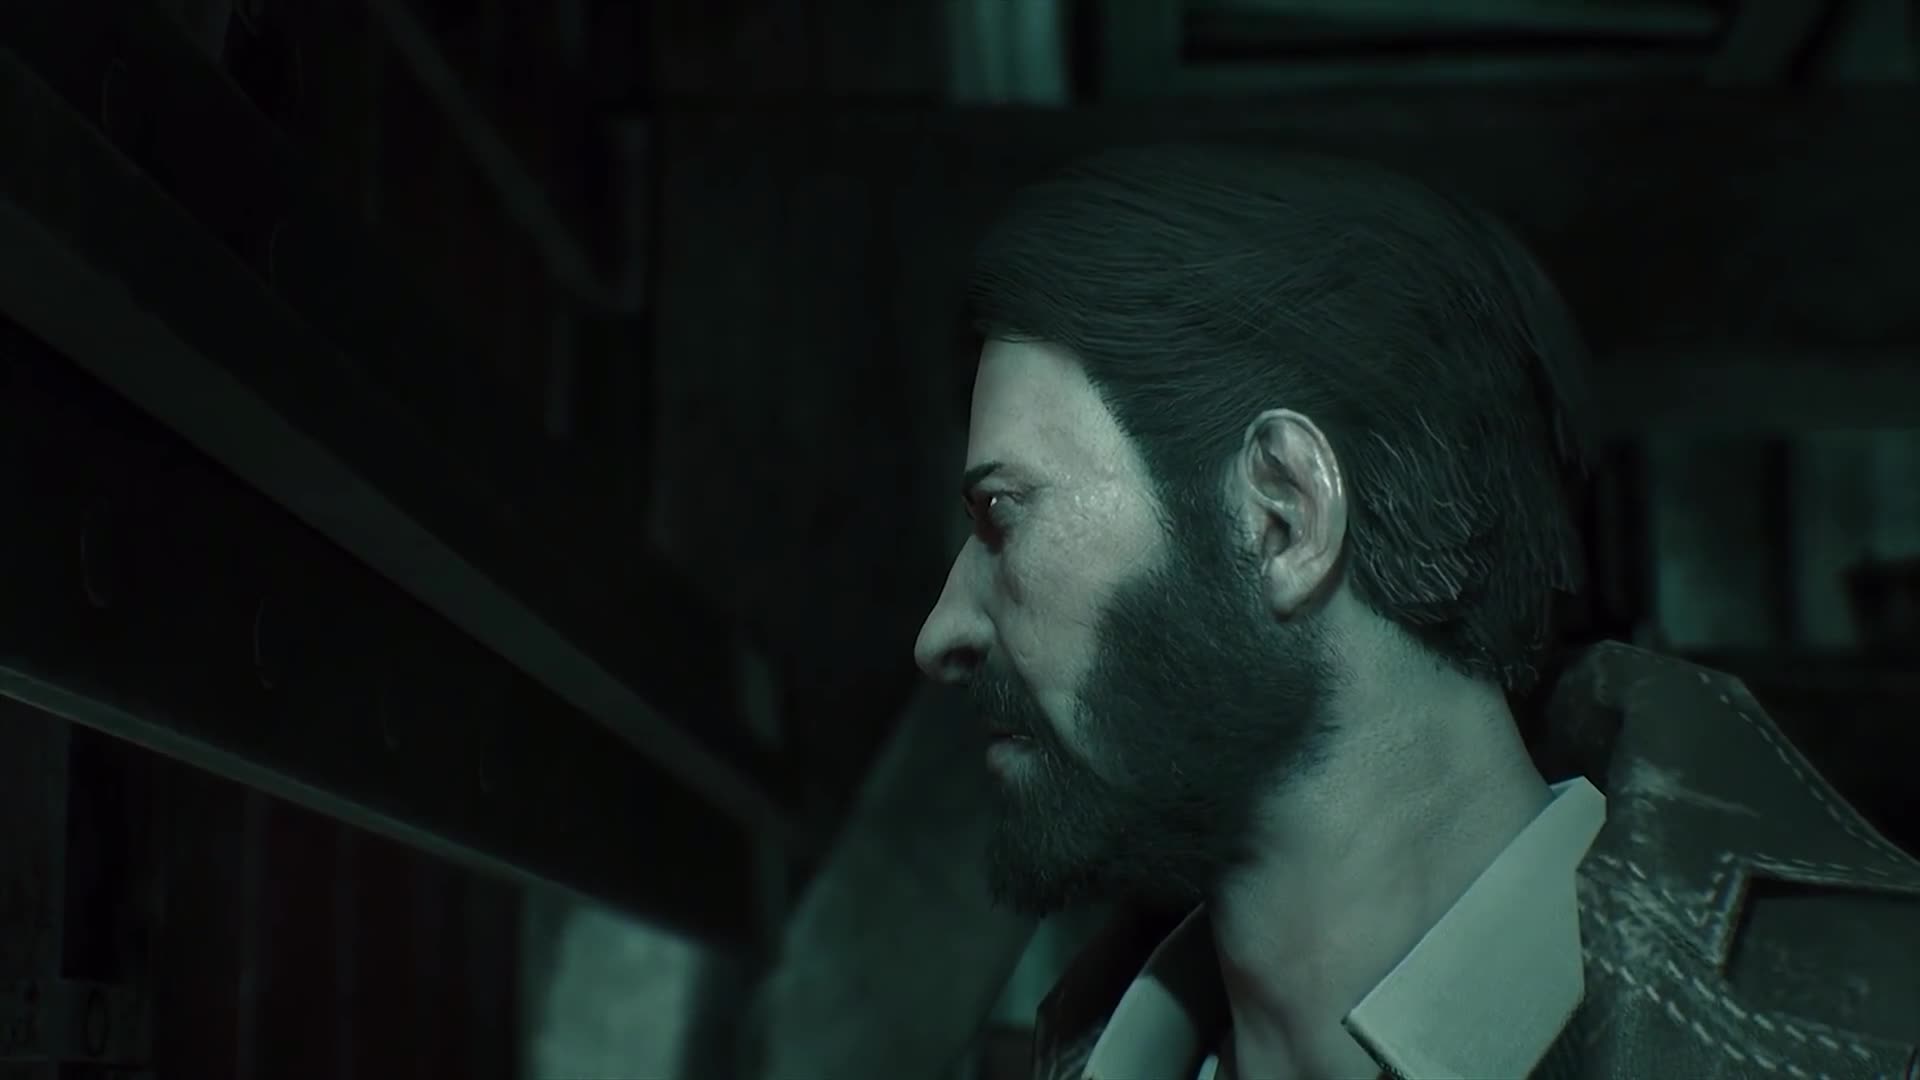 Call of Cthulhu - gameplay trailer